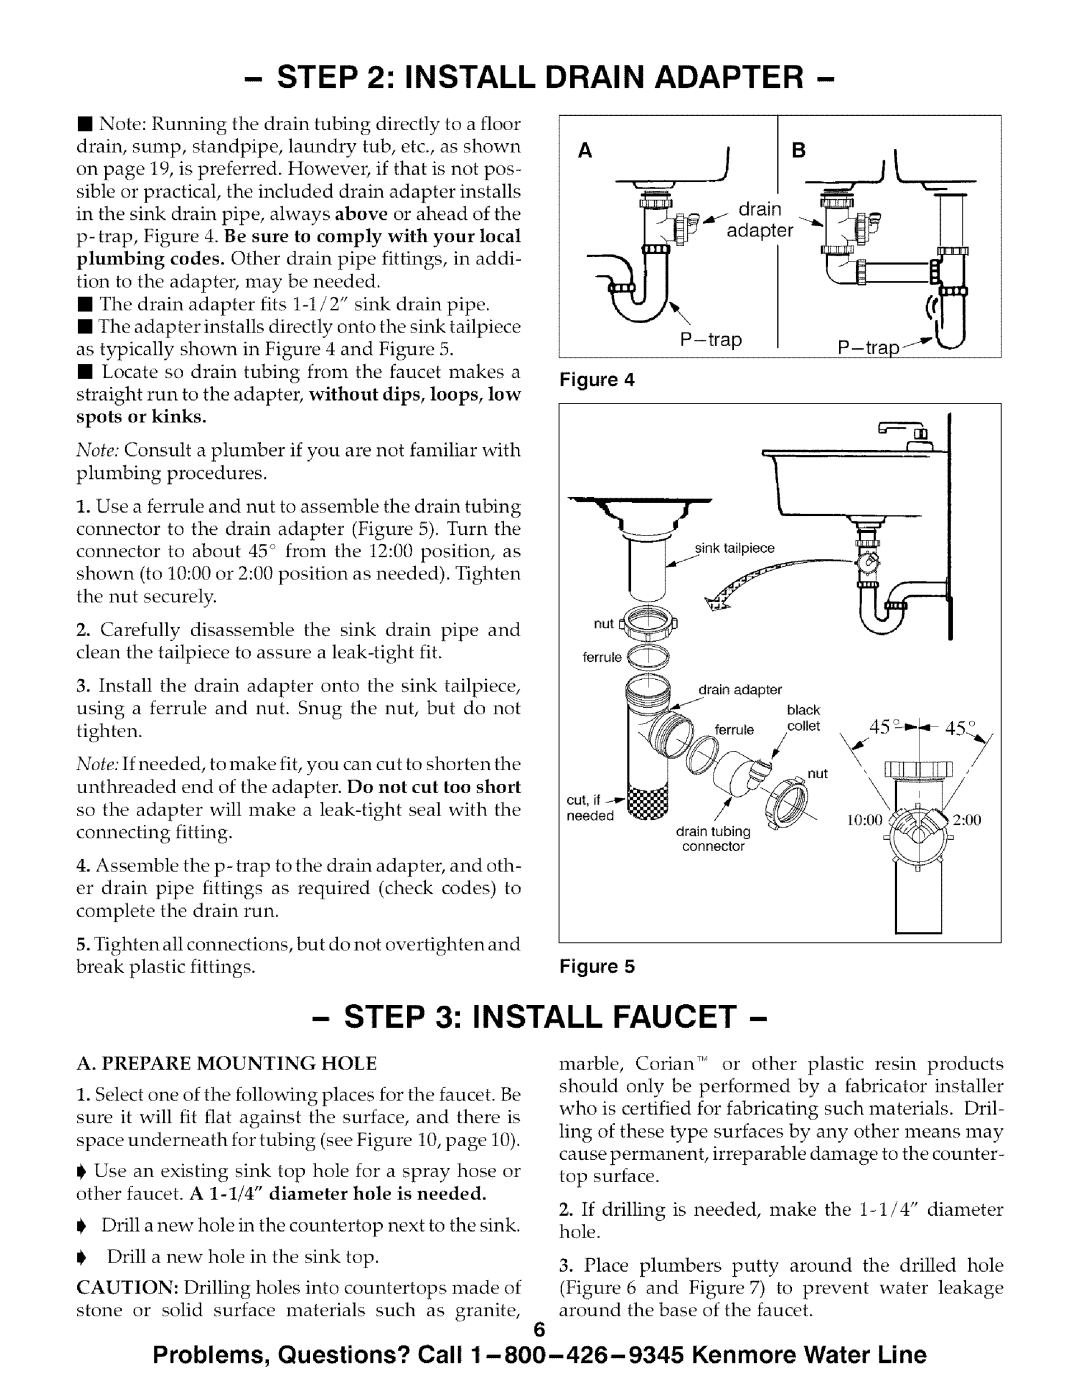 Kenmore 625.385700, 625.385720 owner manual Install Drain Adapter, Install Faucet, A. Prepare Mounting Hole 